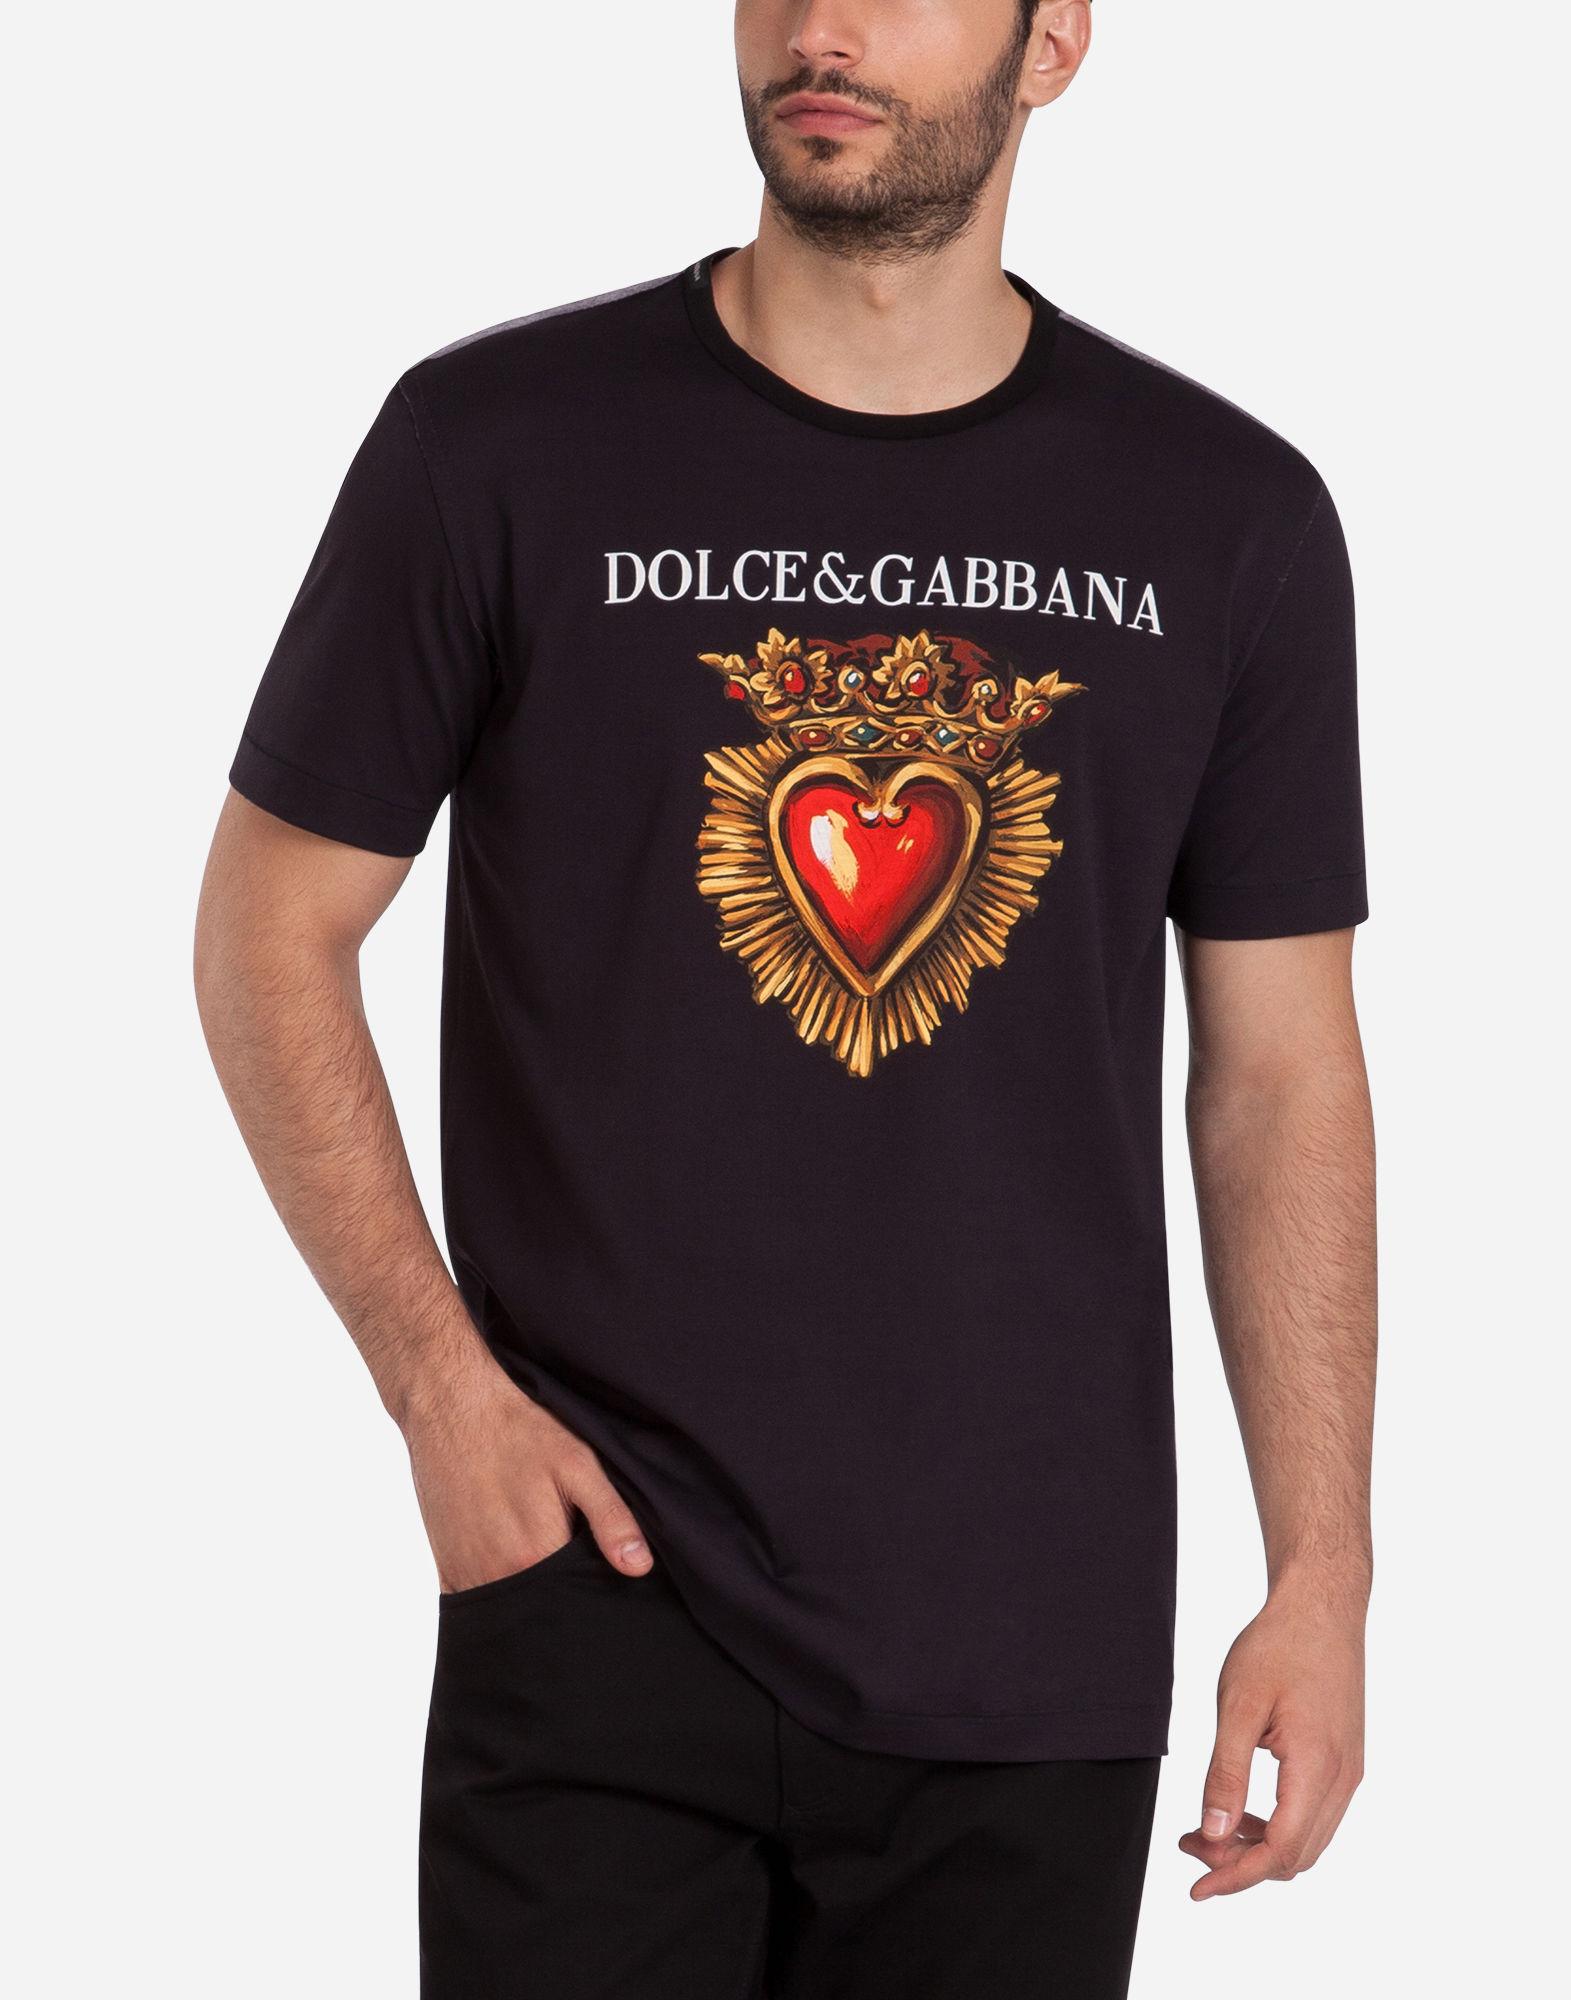 red and black dolce and gabbana shirt